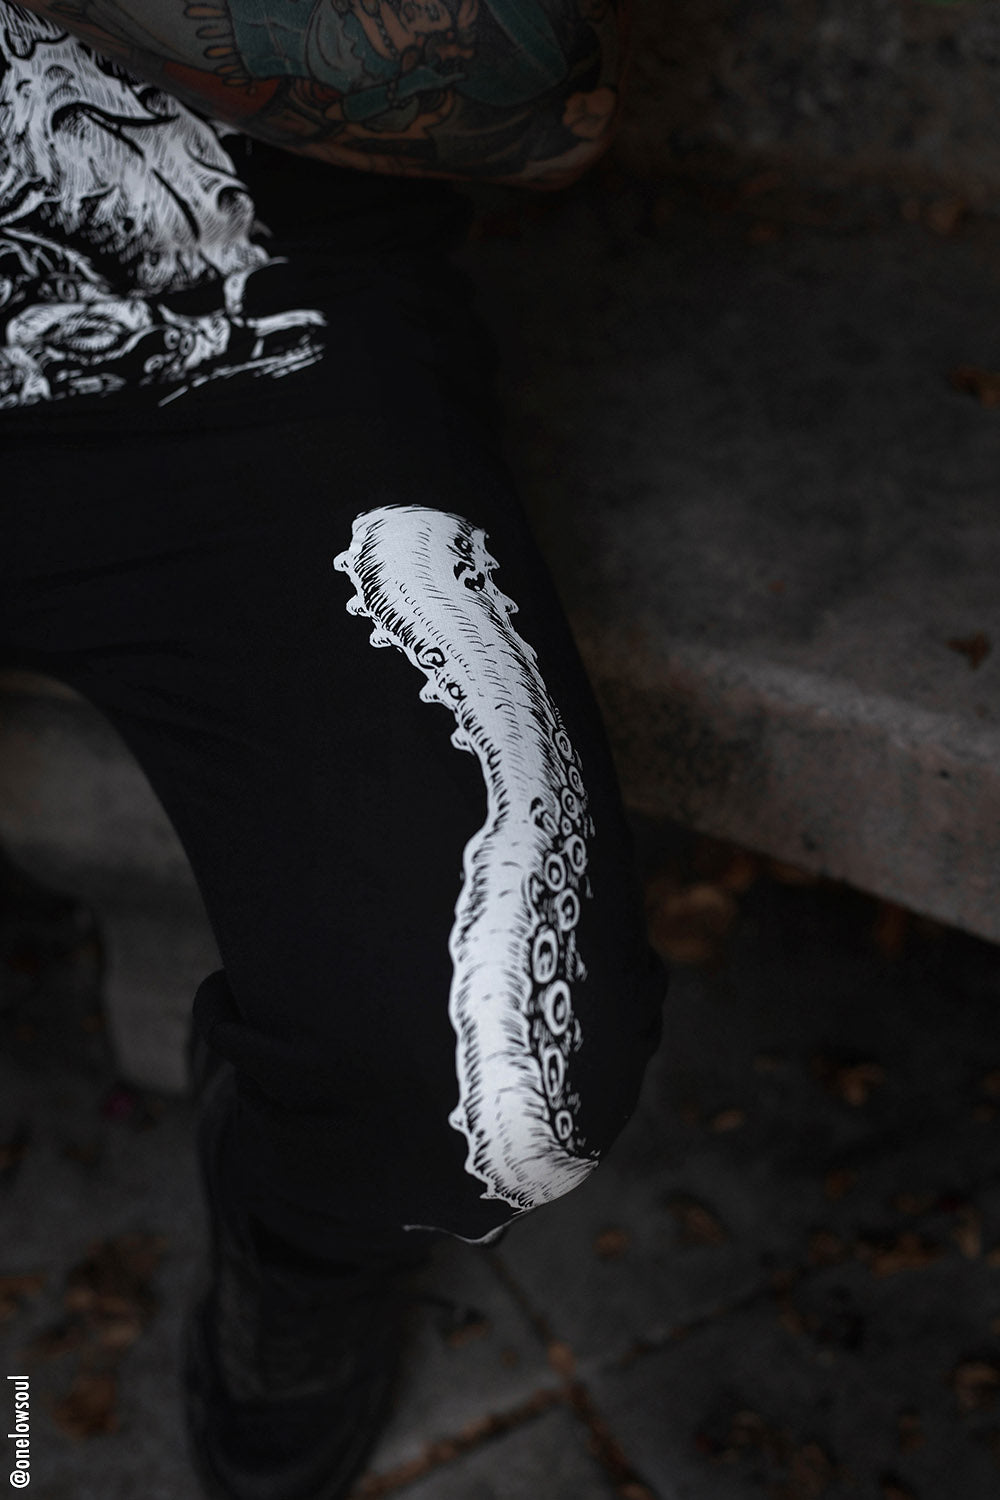 Tentacle Joggers